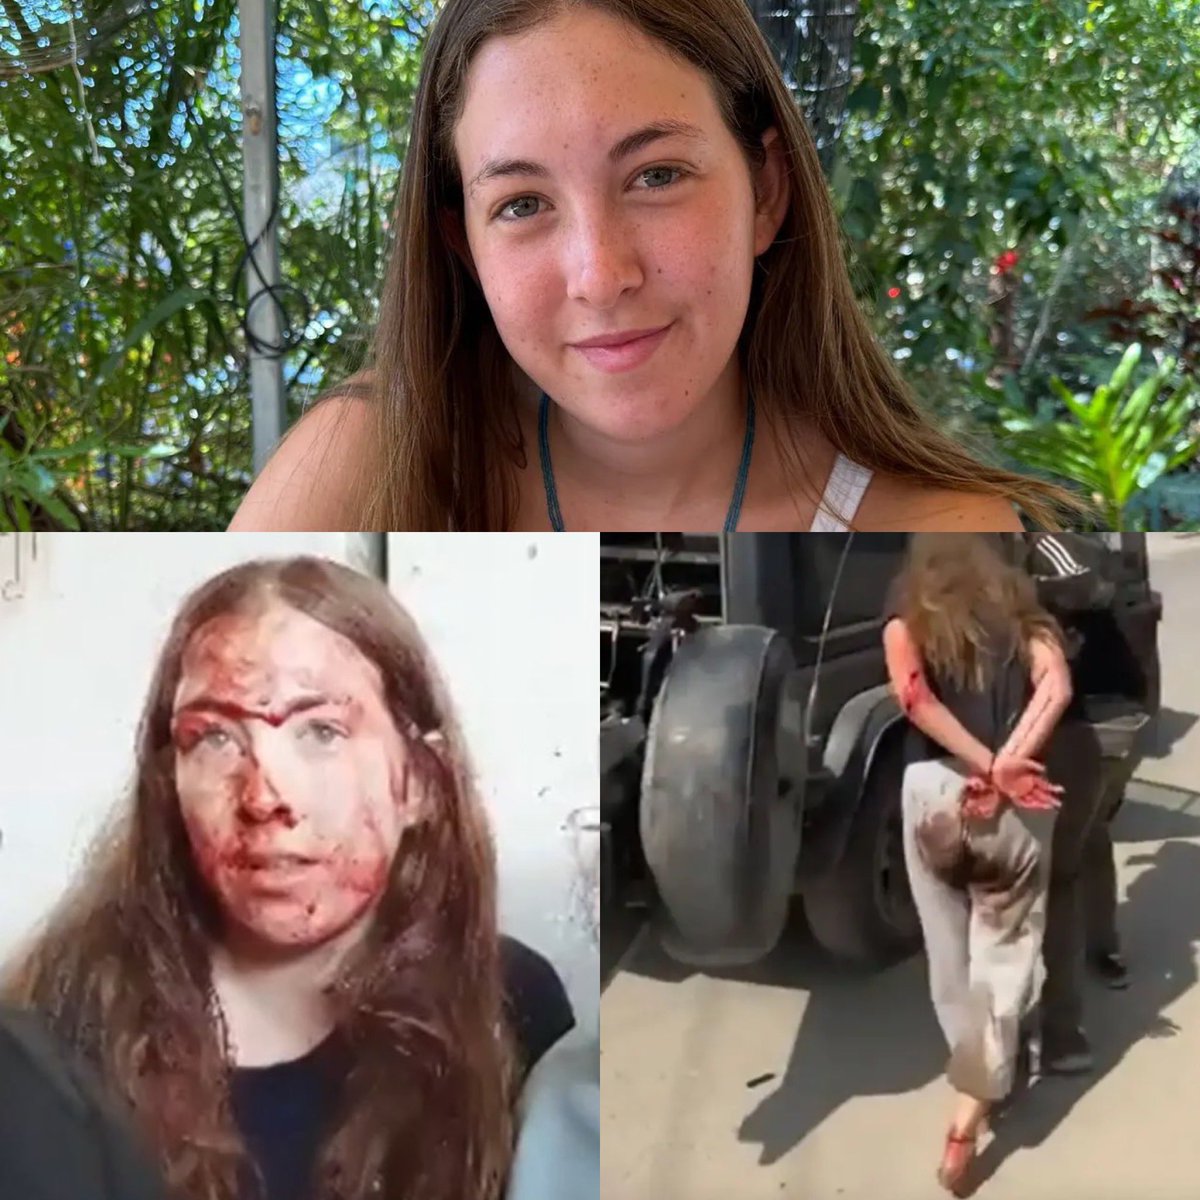 This is 19 year old Naama Levy before and after she was kidnapped on October 7th. They bound her hands behind her back. They cut her shins so she couldn’t run. They beat her face so severely she was drenched in her own blood. They brutalized her body.